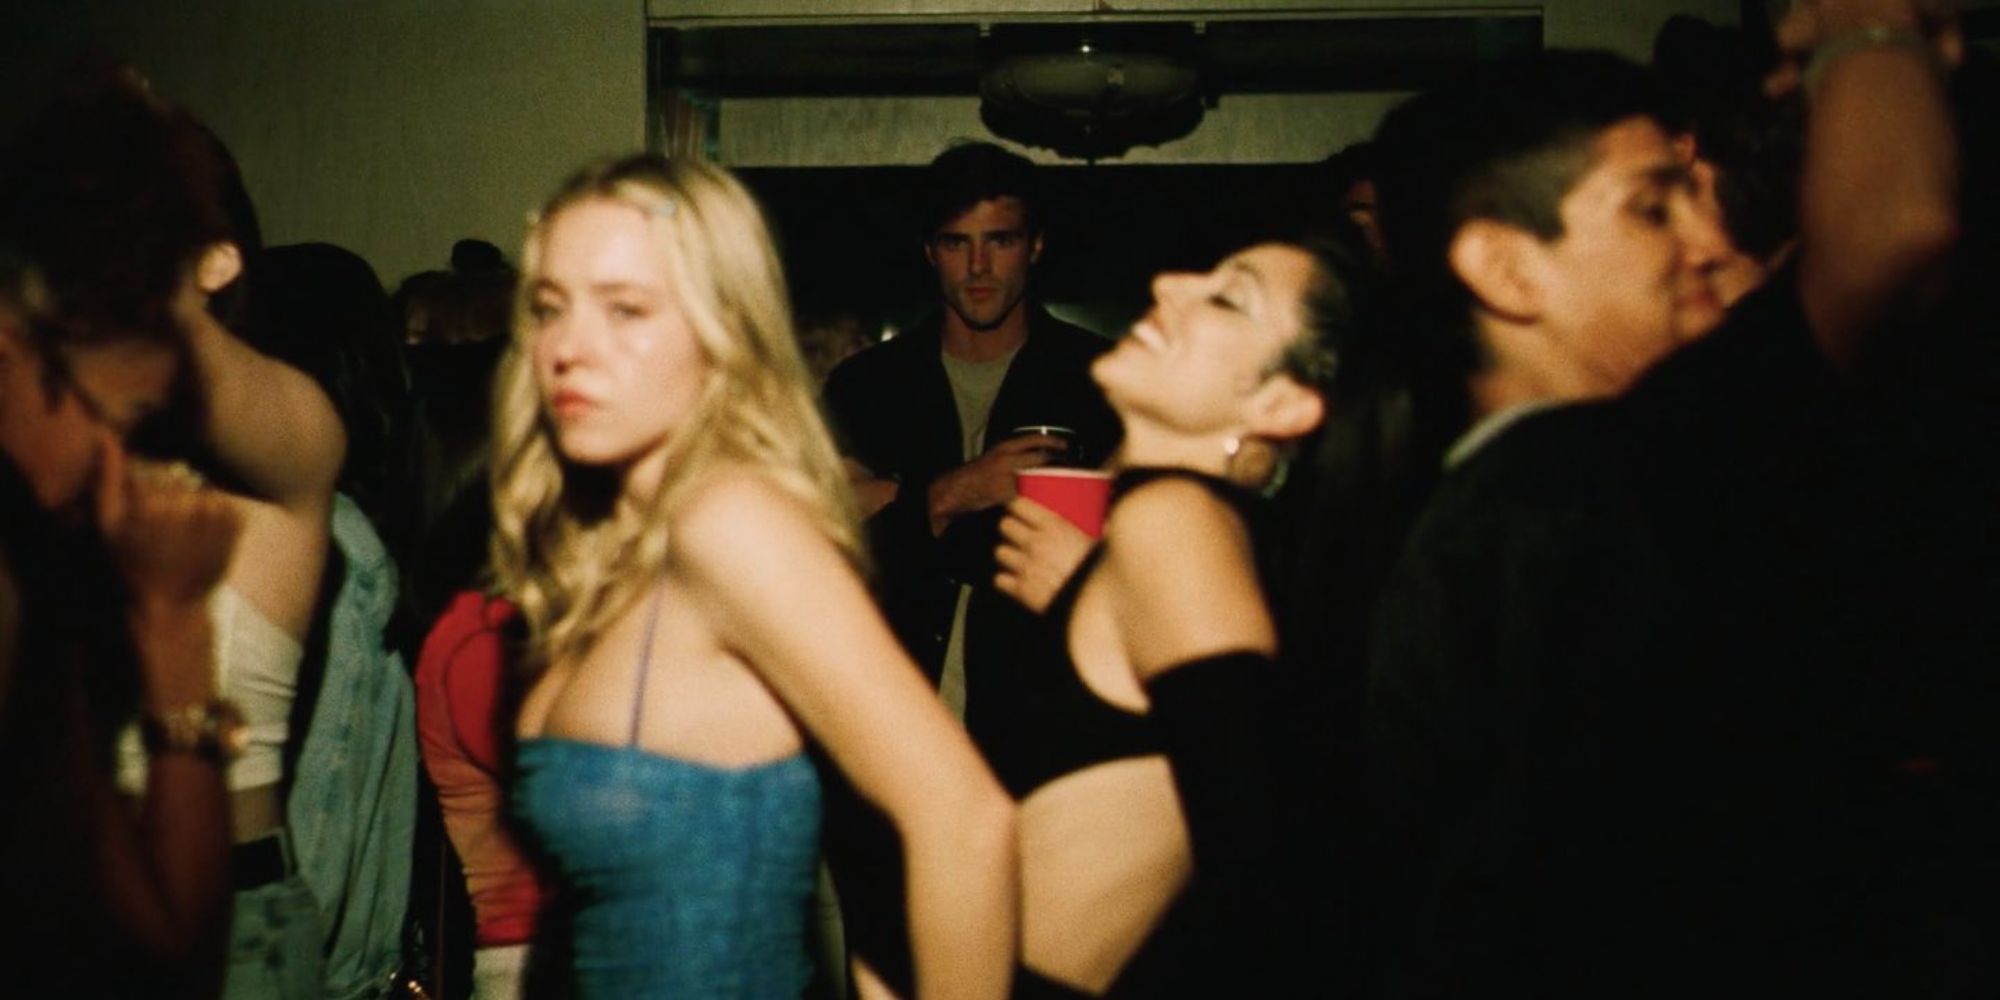 A still from Euphoria, featuring Nate, Cassie, and Maddy.